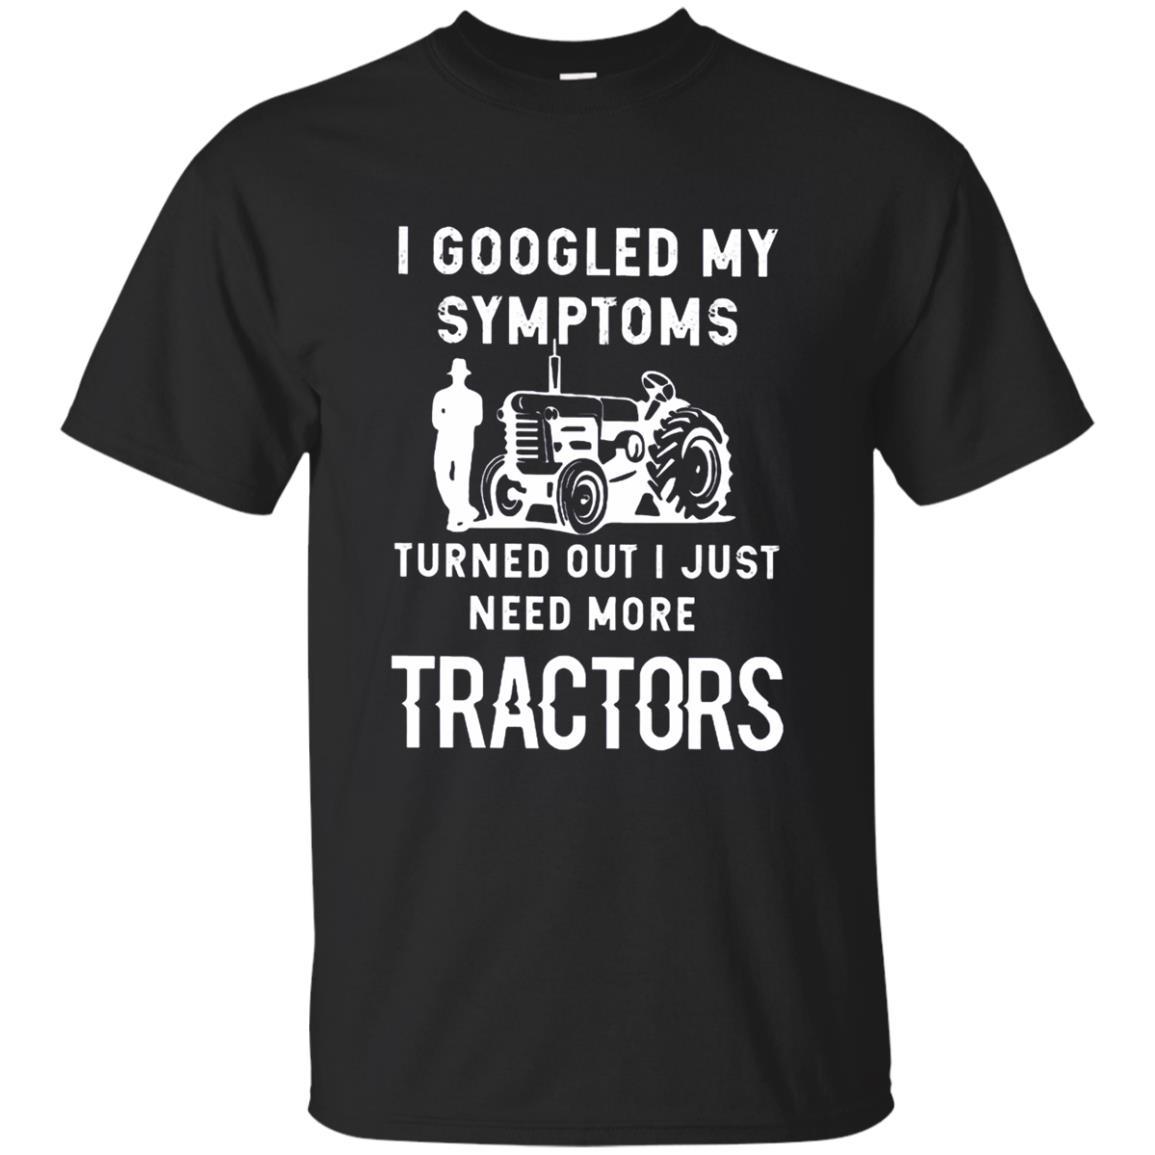 I Googled My Symptoms Turned Out I Just Need More Tractors Shirts